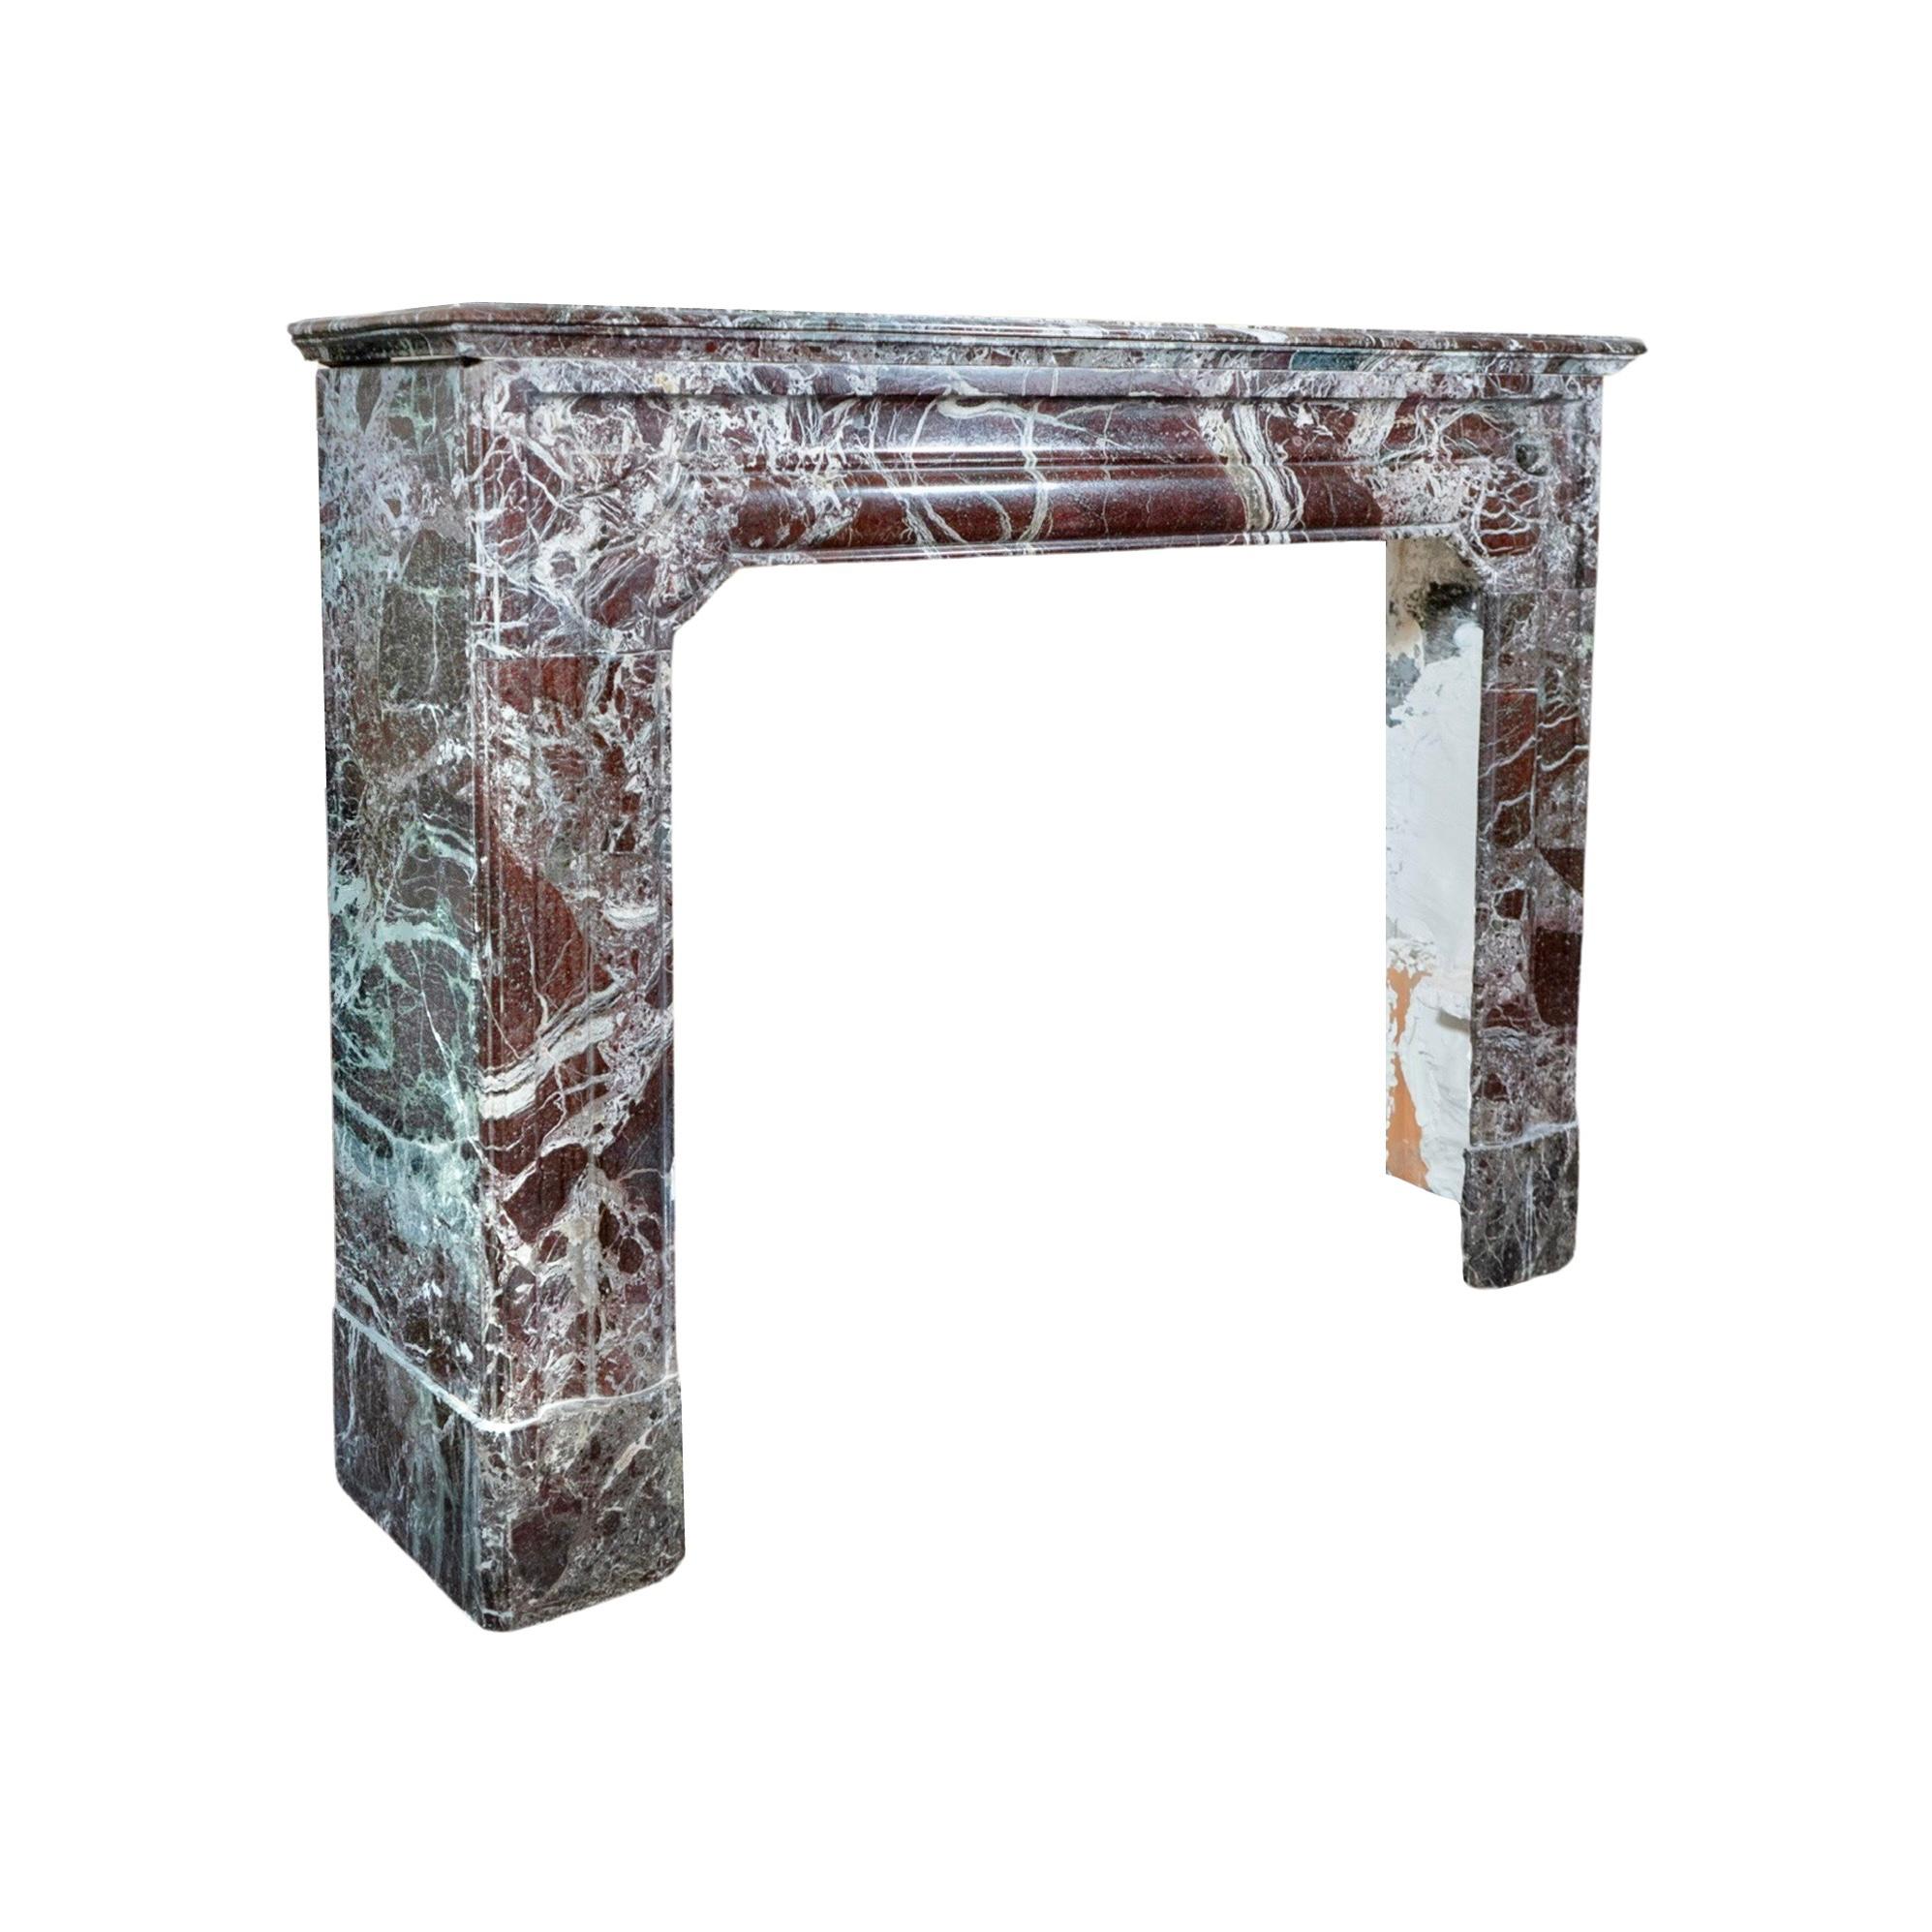 This French Red Levanto Marble Mantel is an exquisite piece of craftsmanship from 1870s France. With its bolection style carvings, it adds a touch of elegance to any room. Made from premium quality Red Levanto Marble, it is sure to impress with its